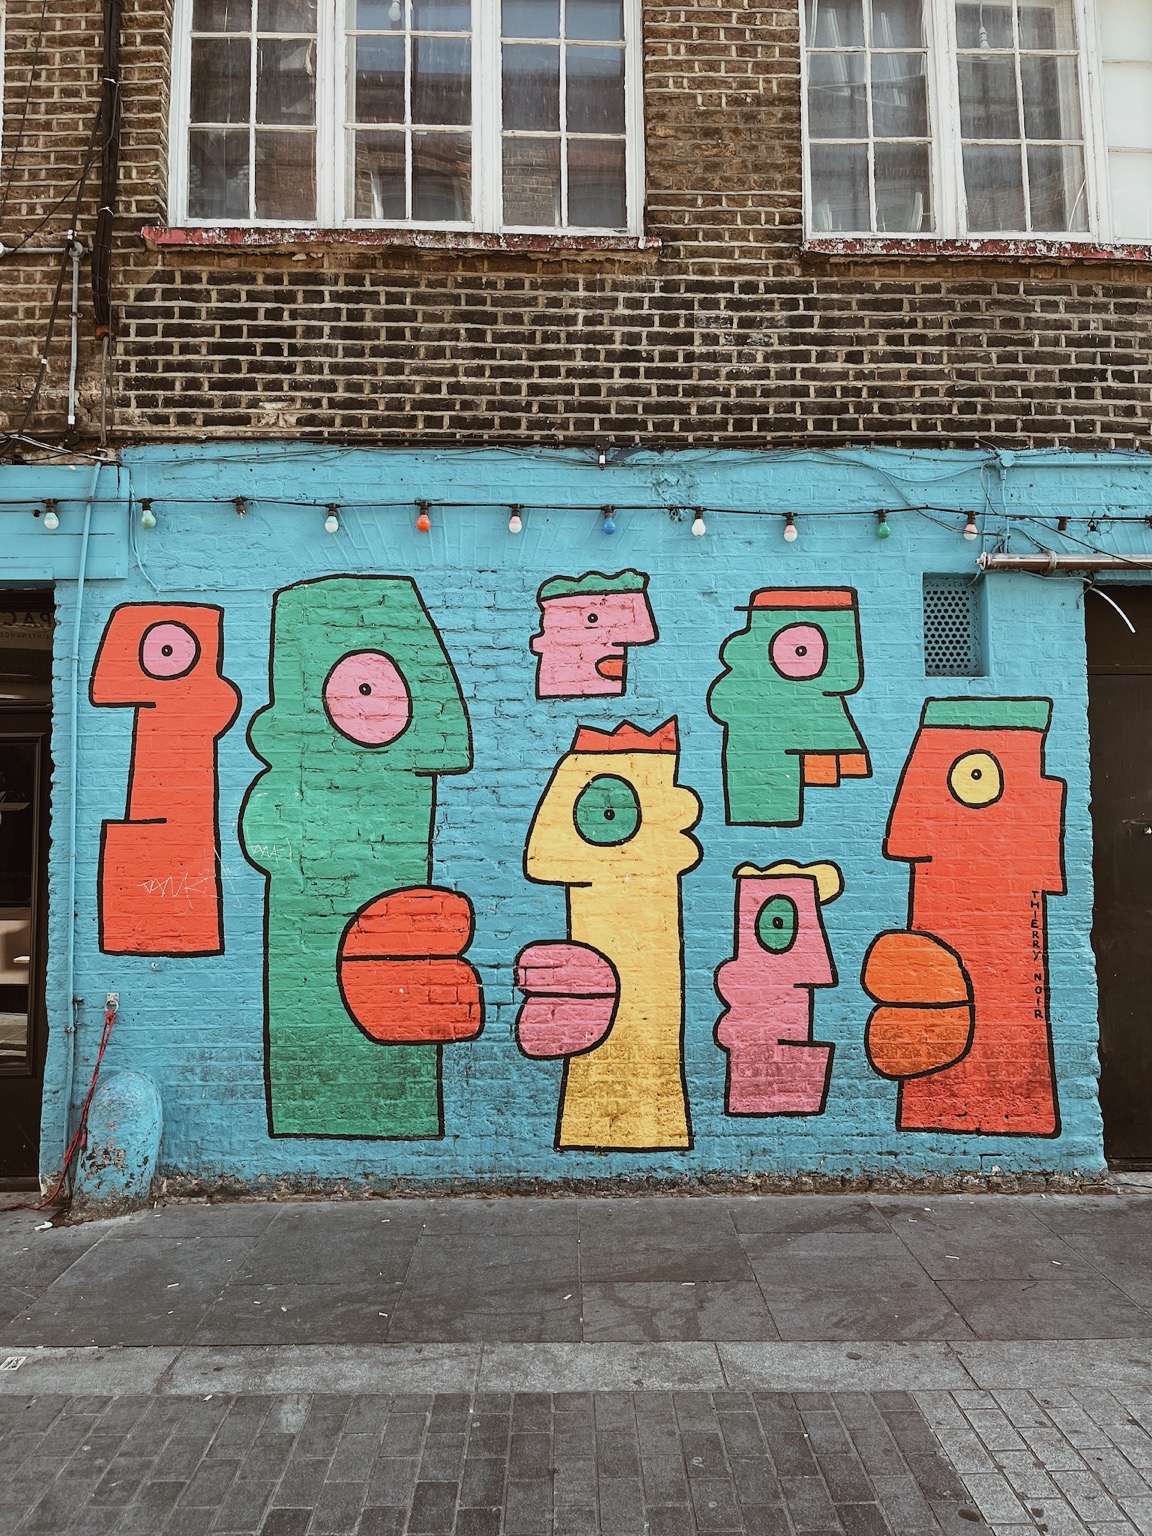 London street art representing profiles with different colors like green, red and yellow.